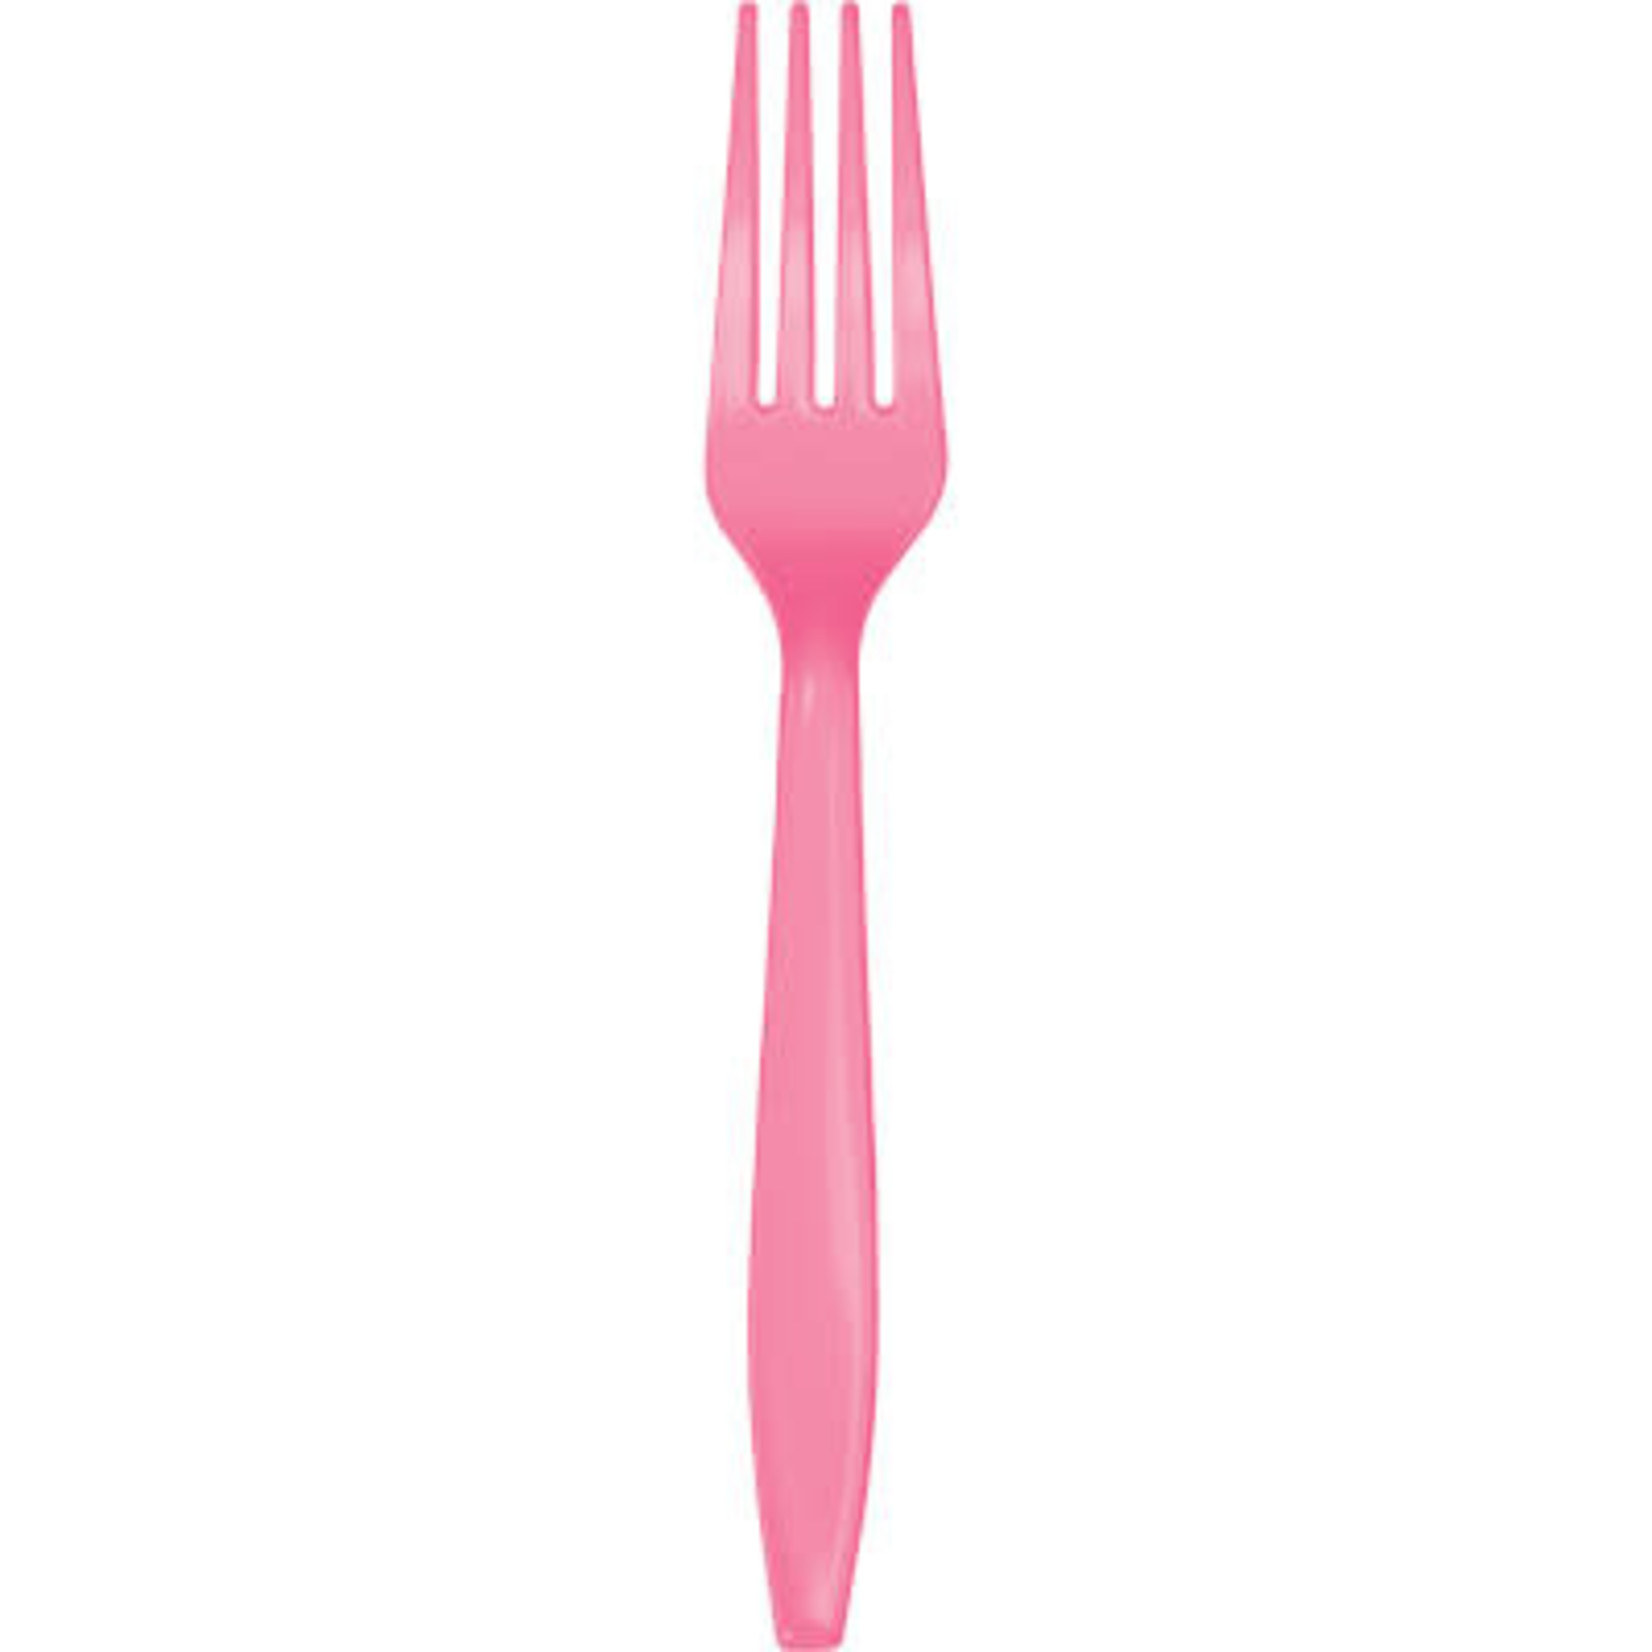 Touch of Color Candy Pink Premium Plastic Forks - 24ct.